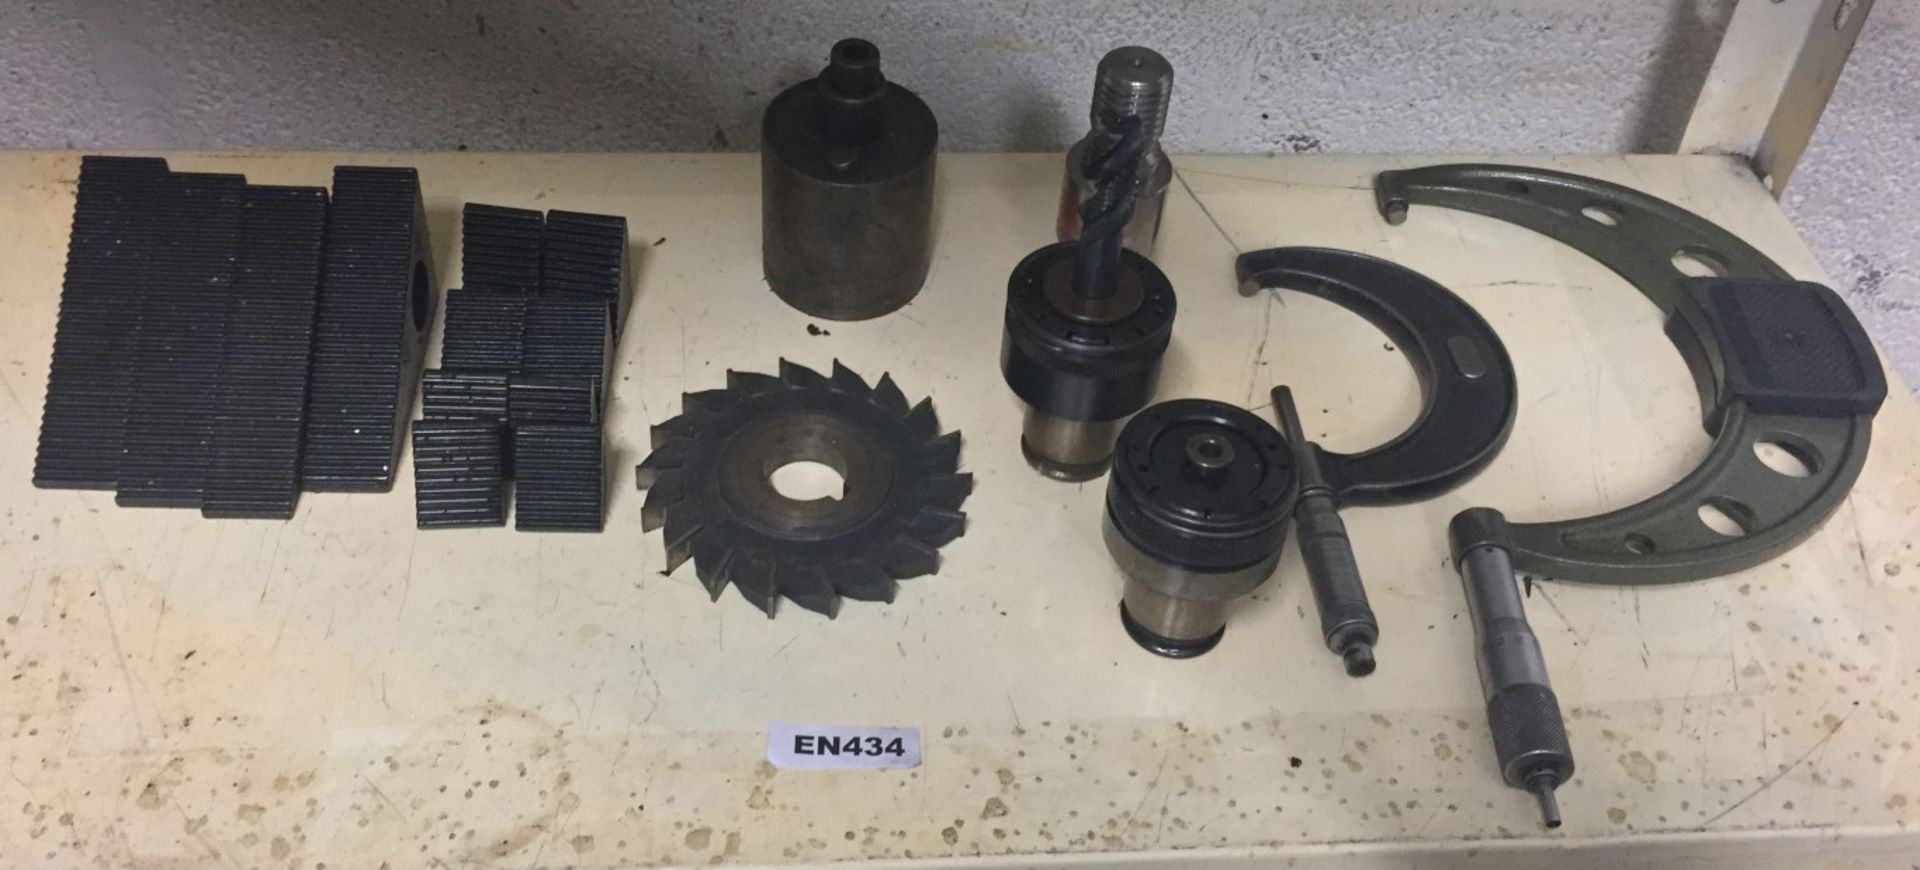 1 x Shelf Lot comprising of approximate 6 x assorted CNC/VMC Mill Chucks, 2 Calipers, 12 clamp steps - Image 3 of 21